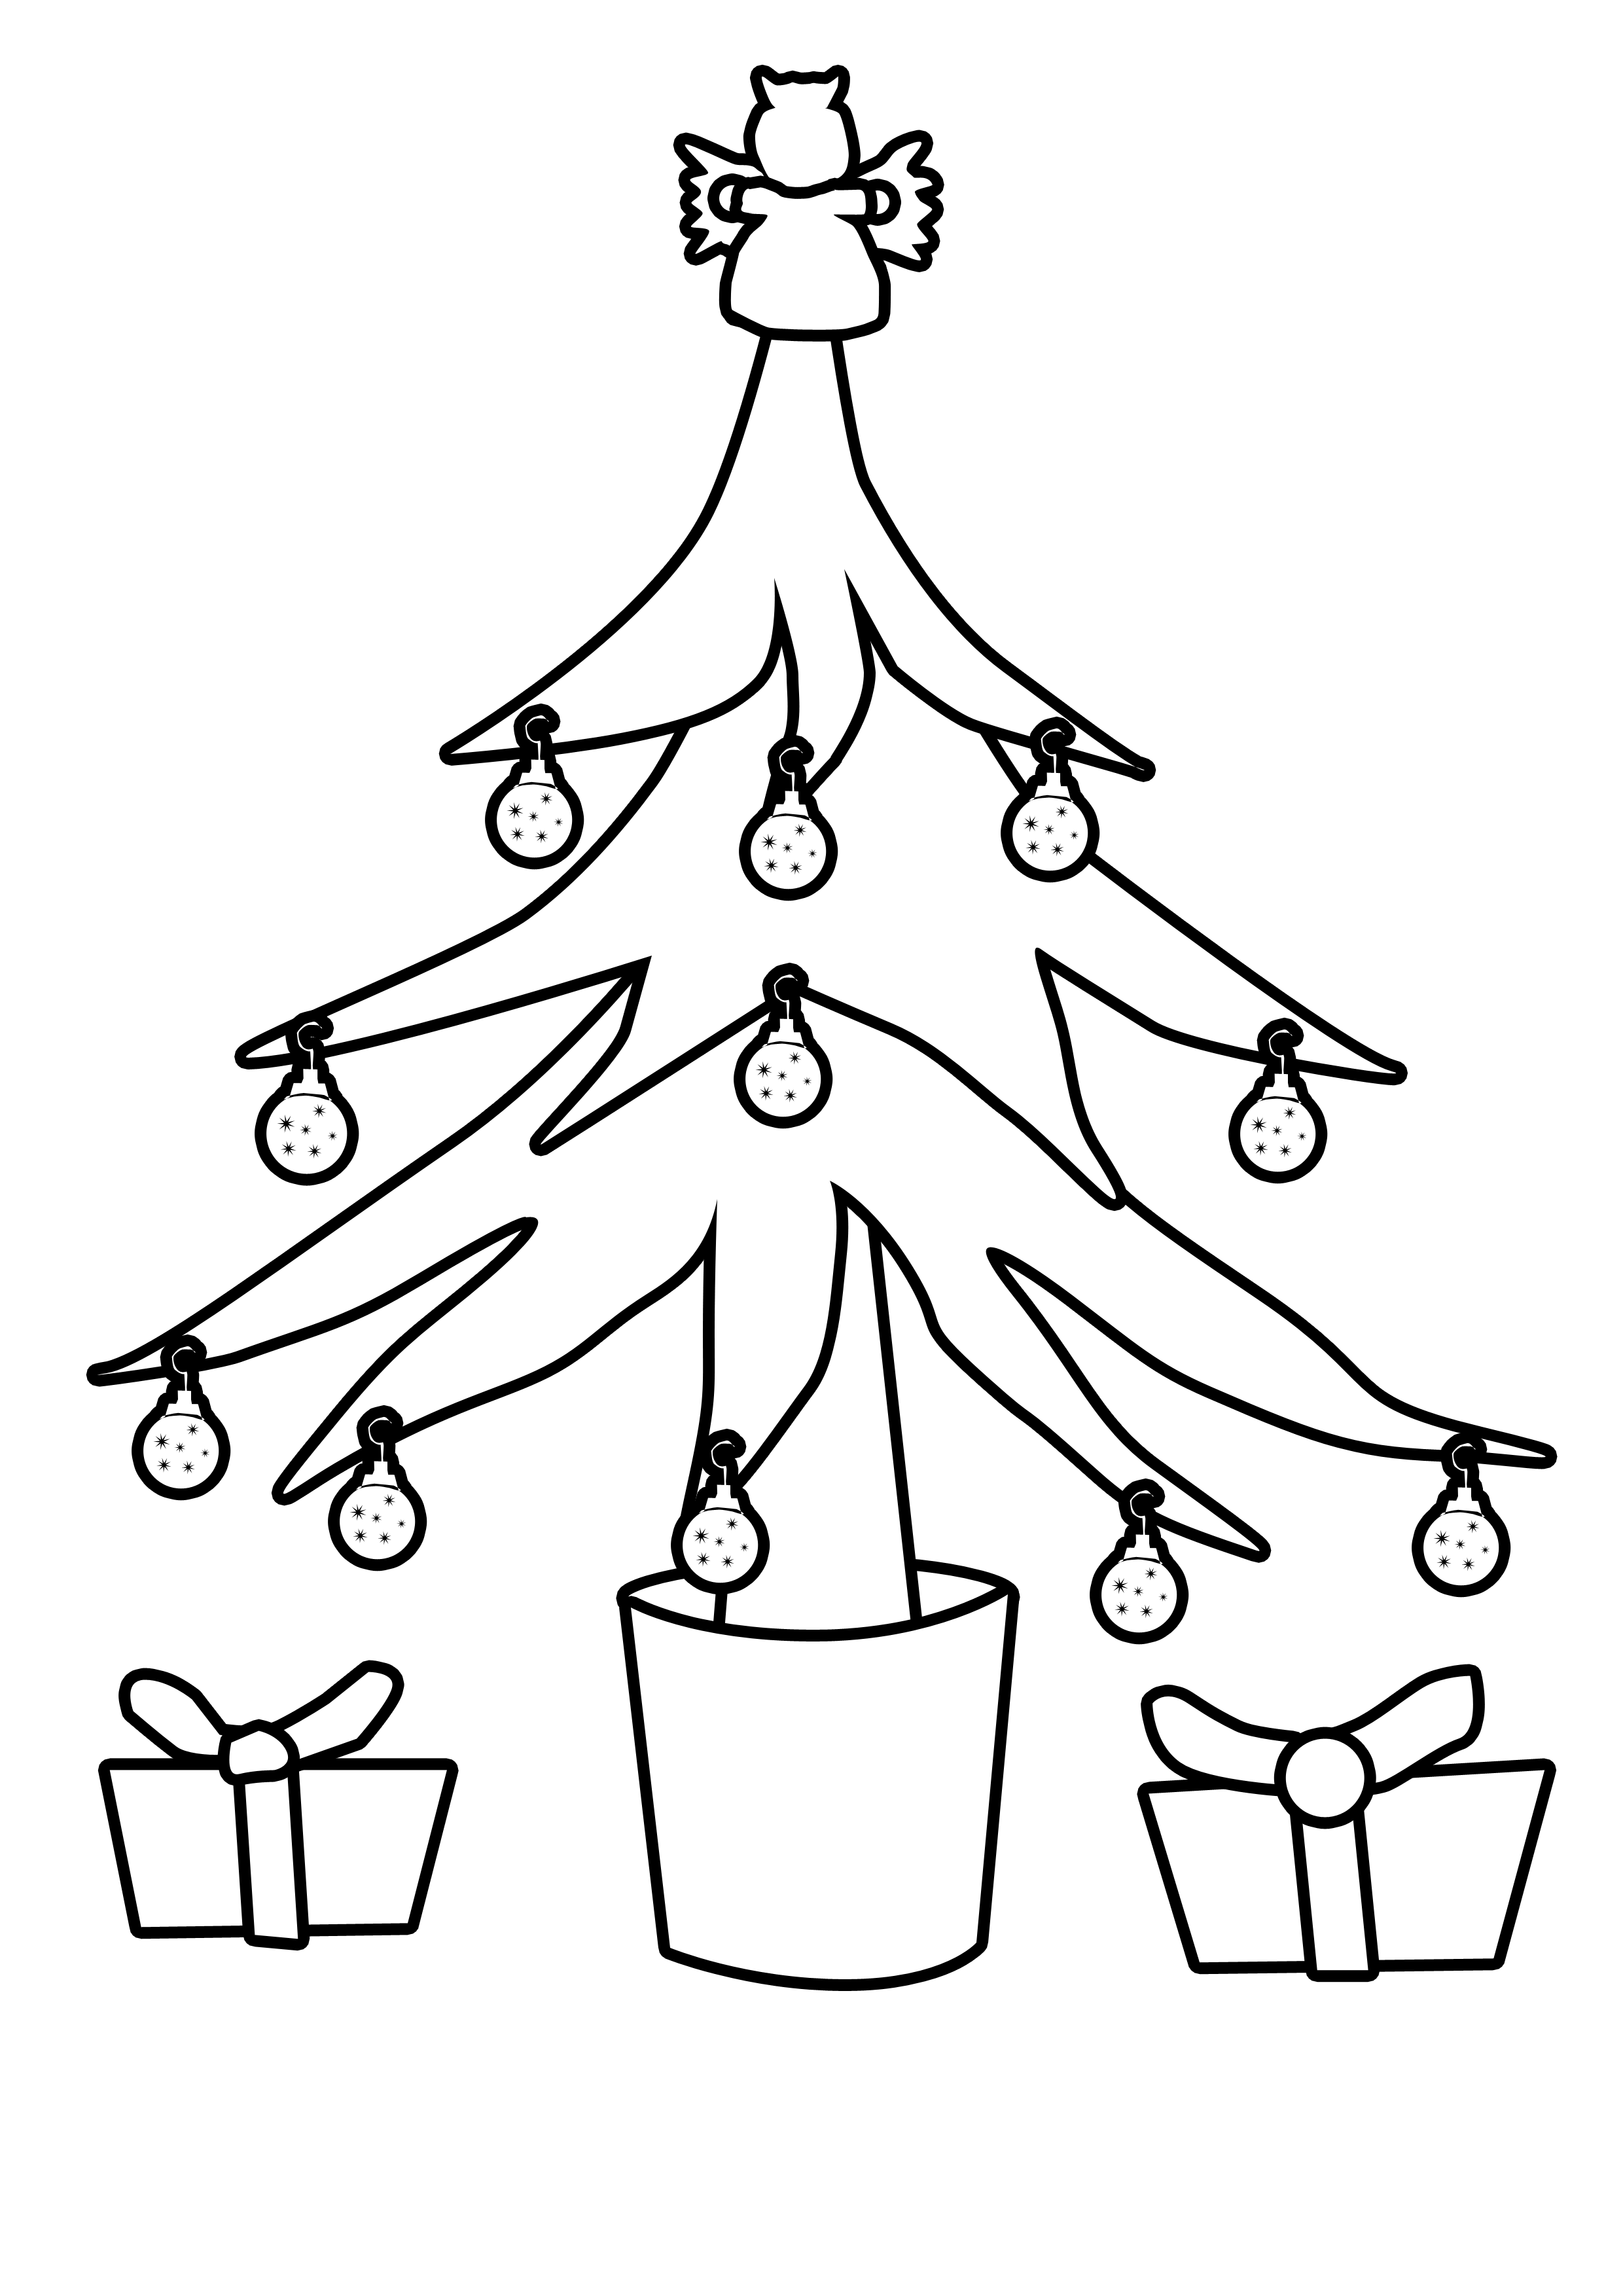 christmas-tree-template-in-2020-different-trees-outline